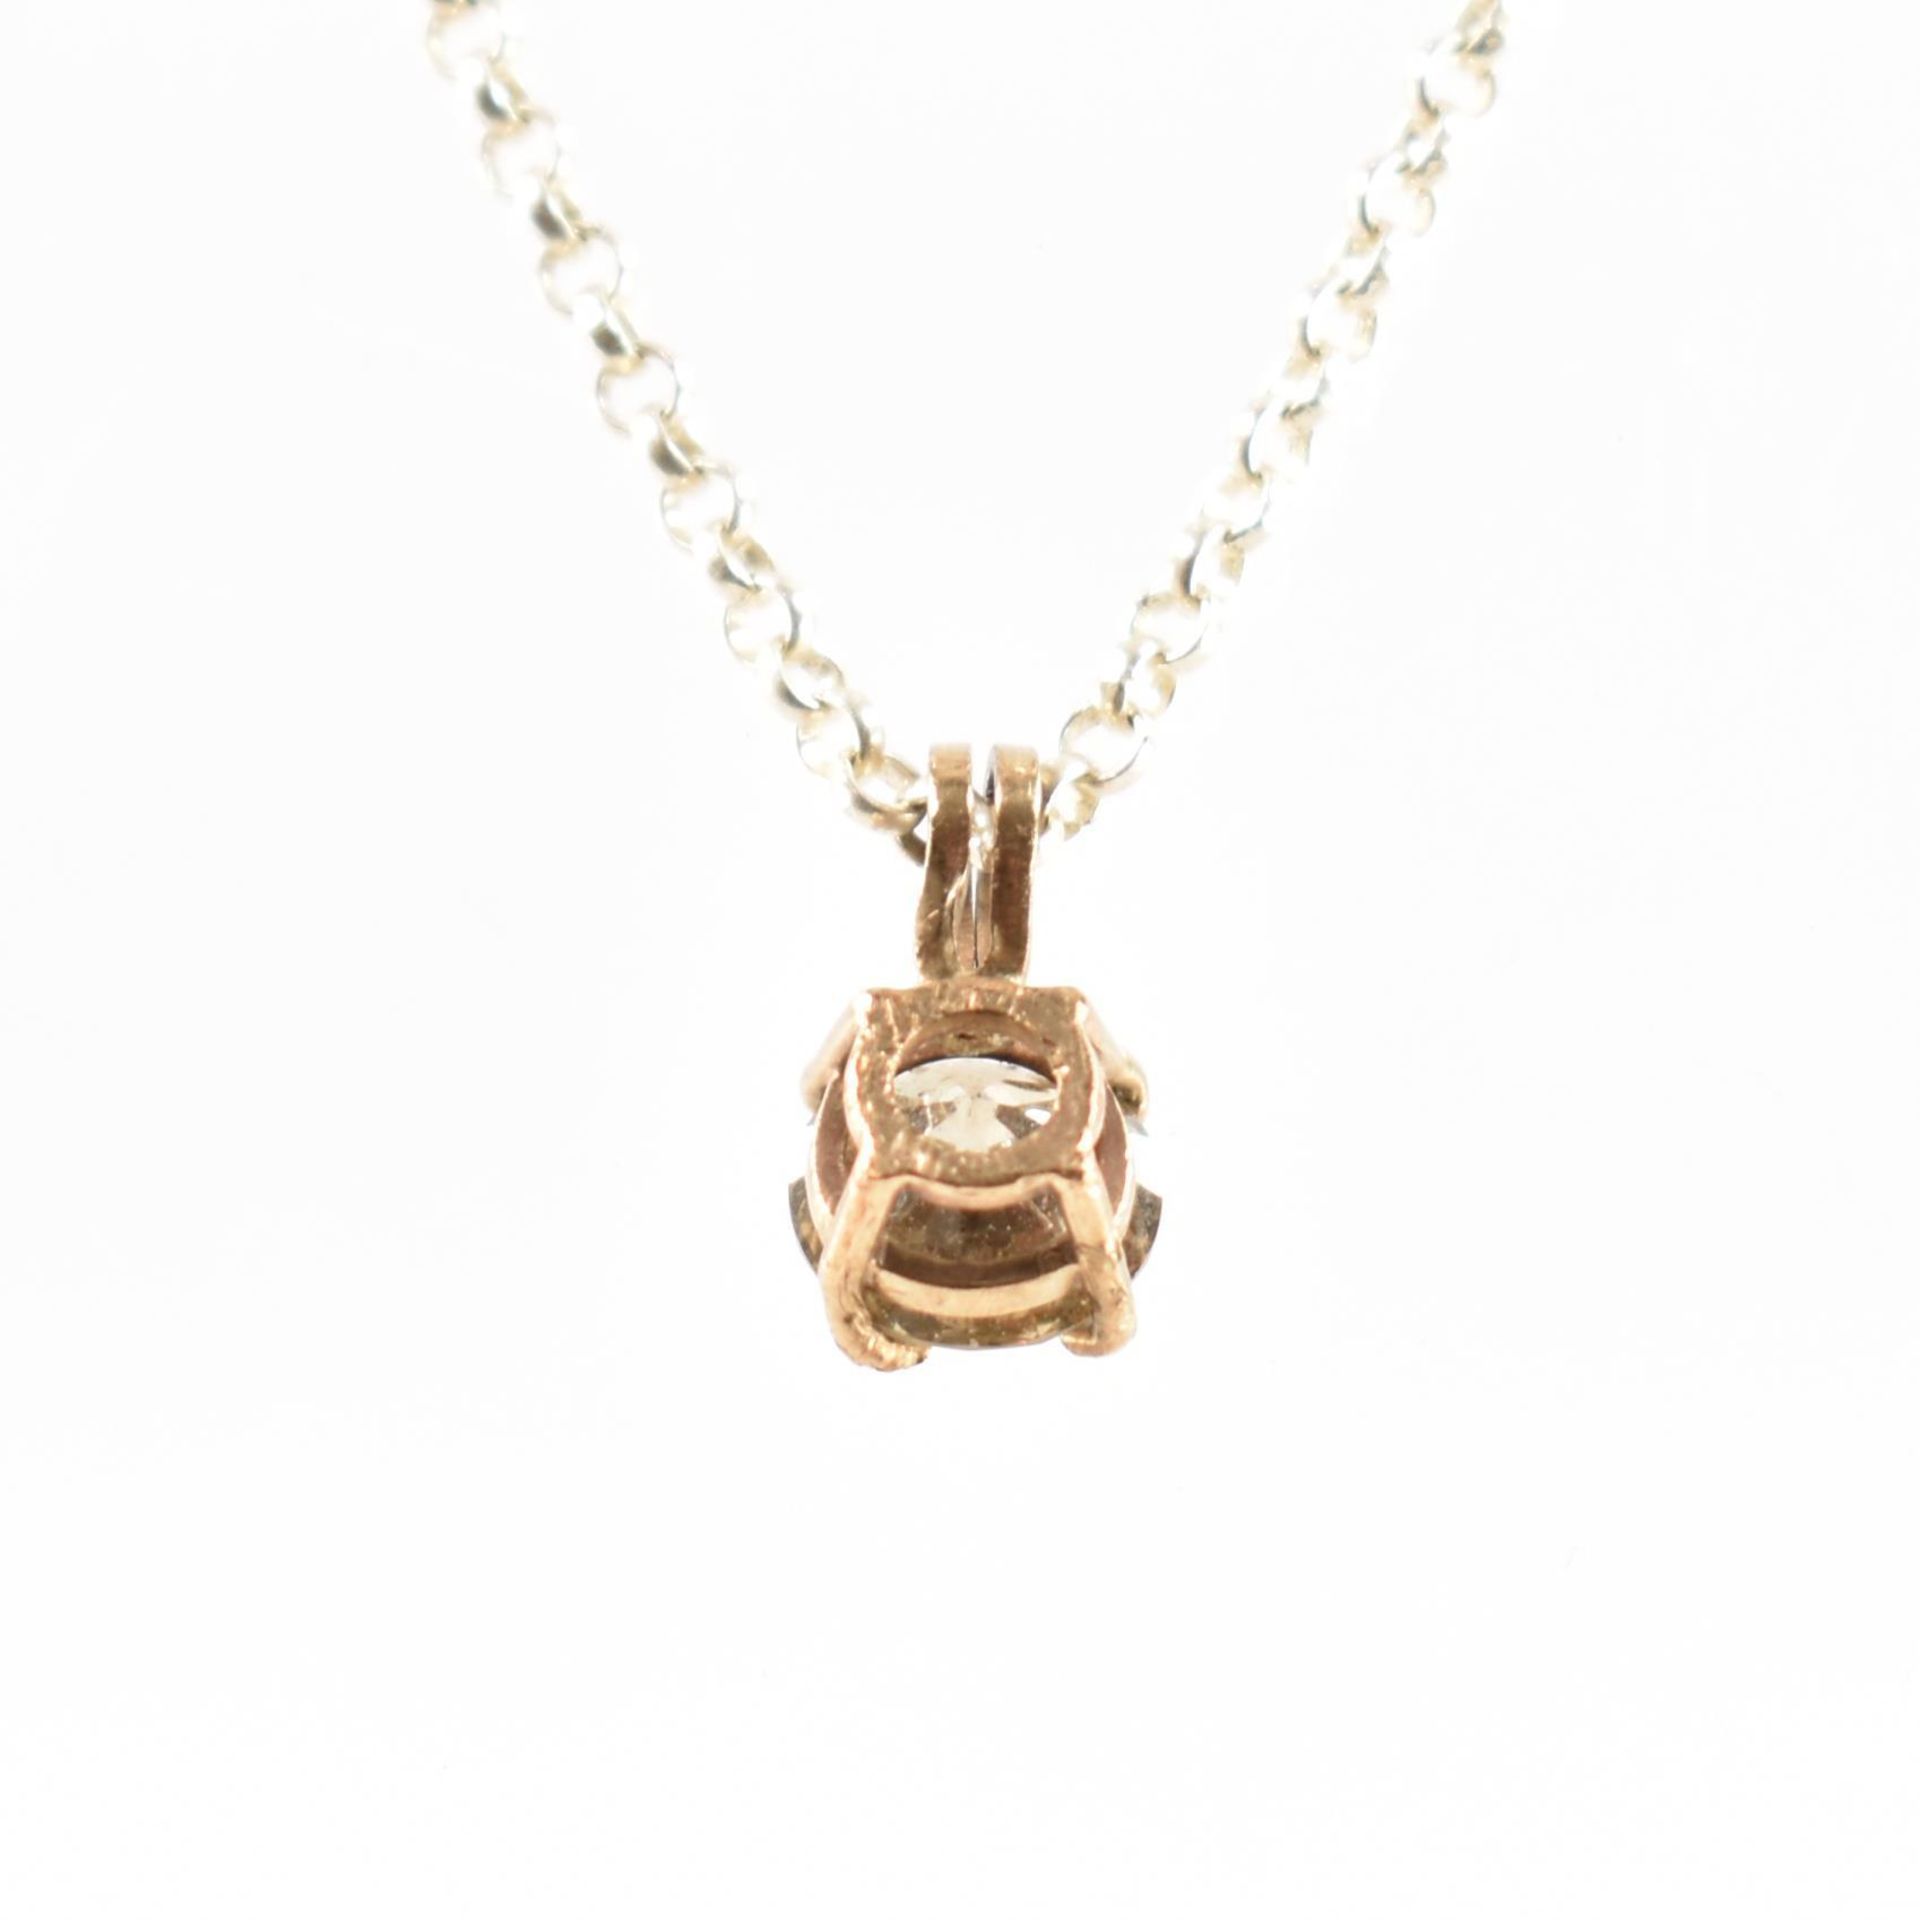 GOLD & CHAMPAGNE DIAMOND PENDANT WITH 925 SILVER CHAIN NECKLACE - Image 3 of 4